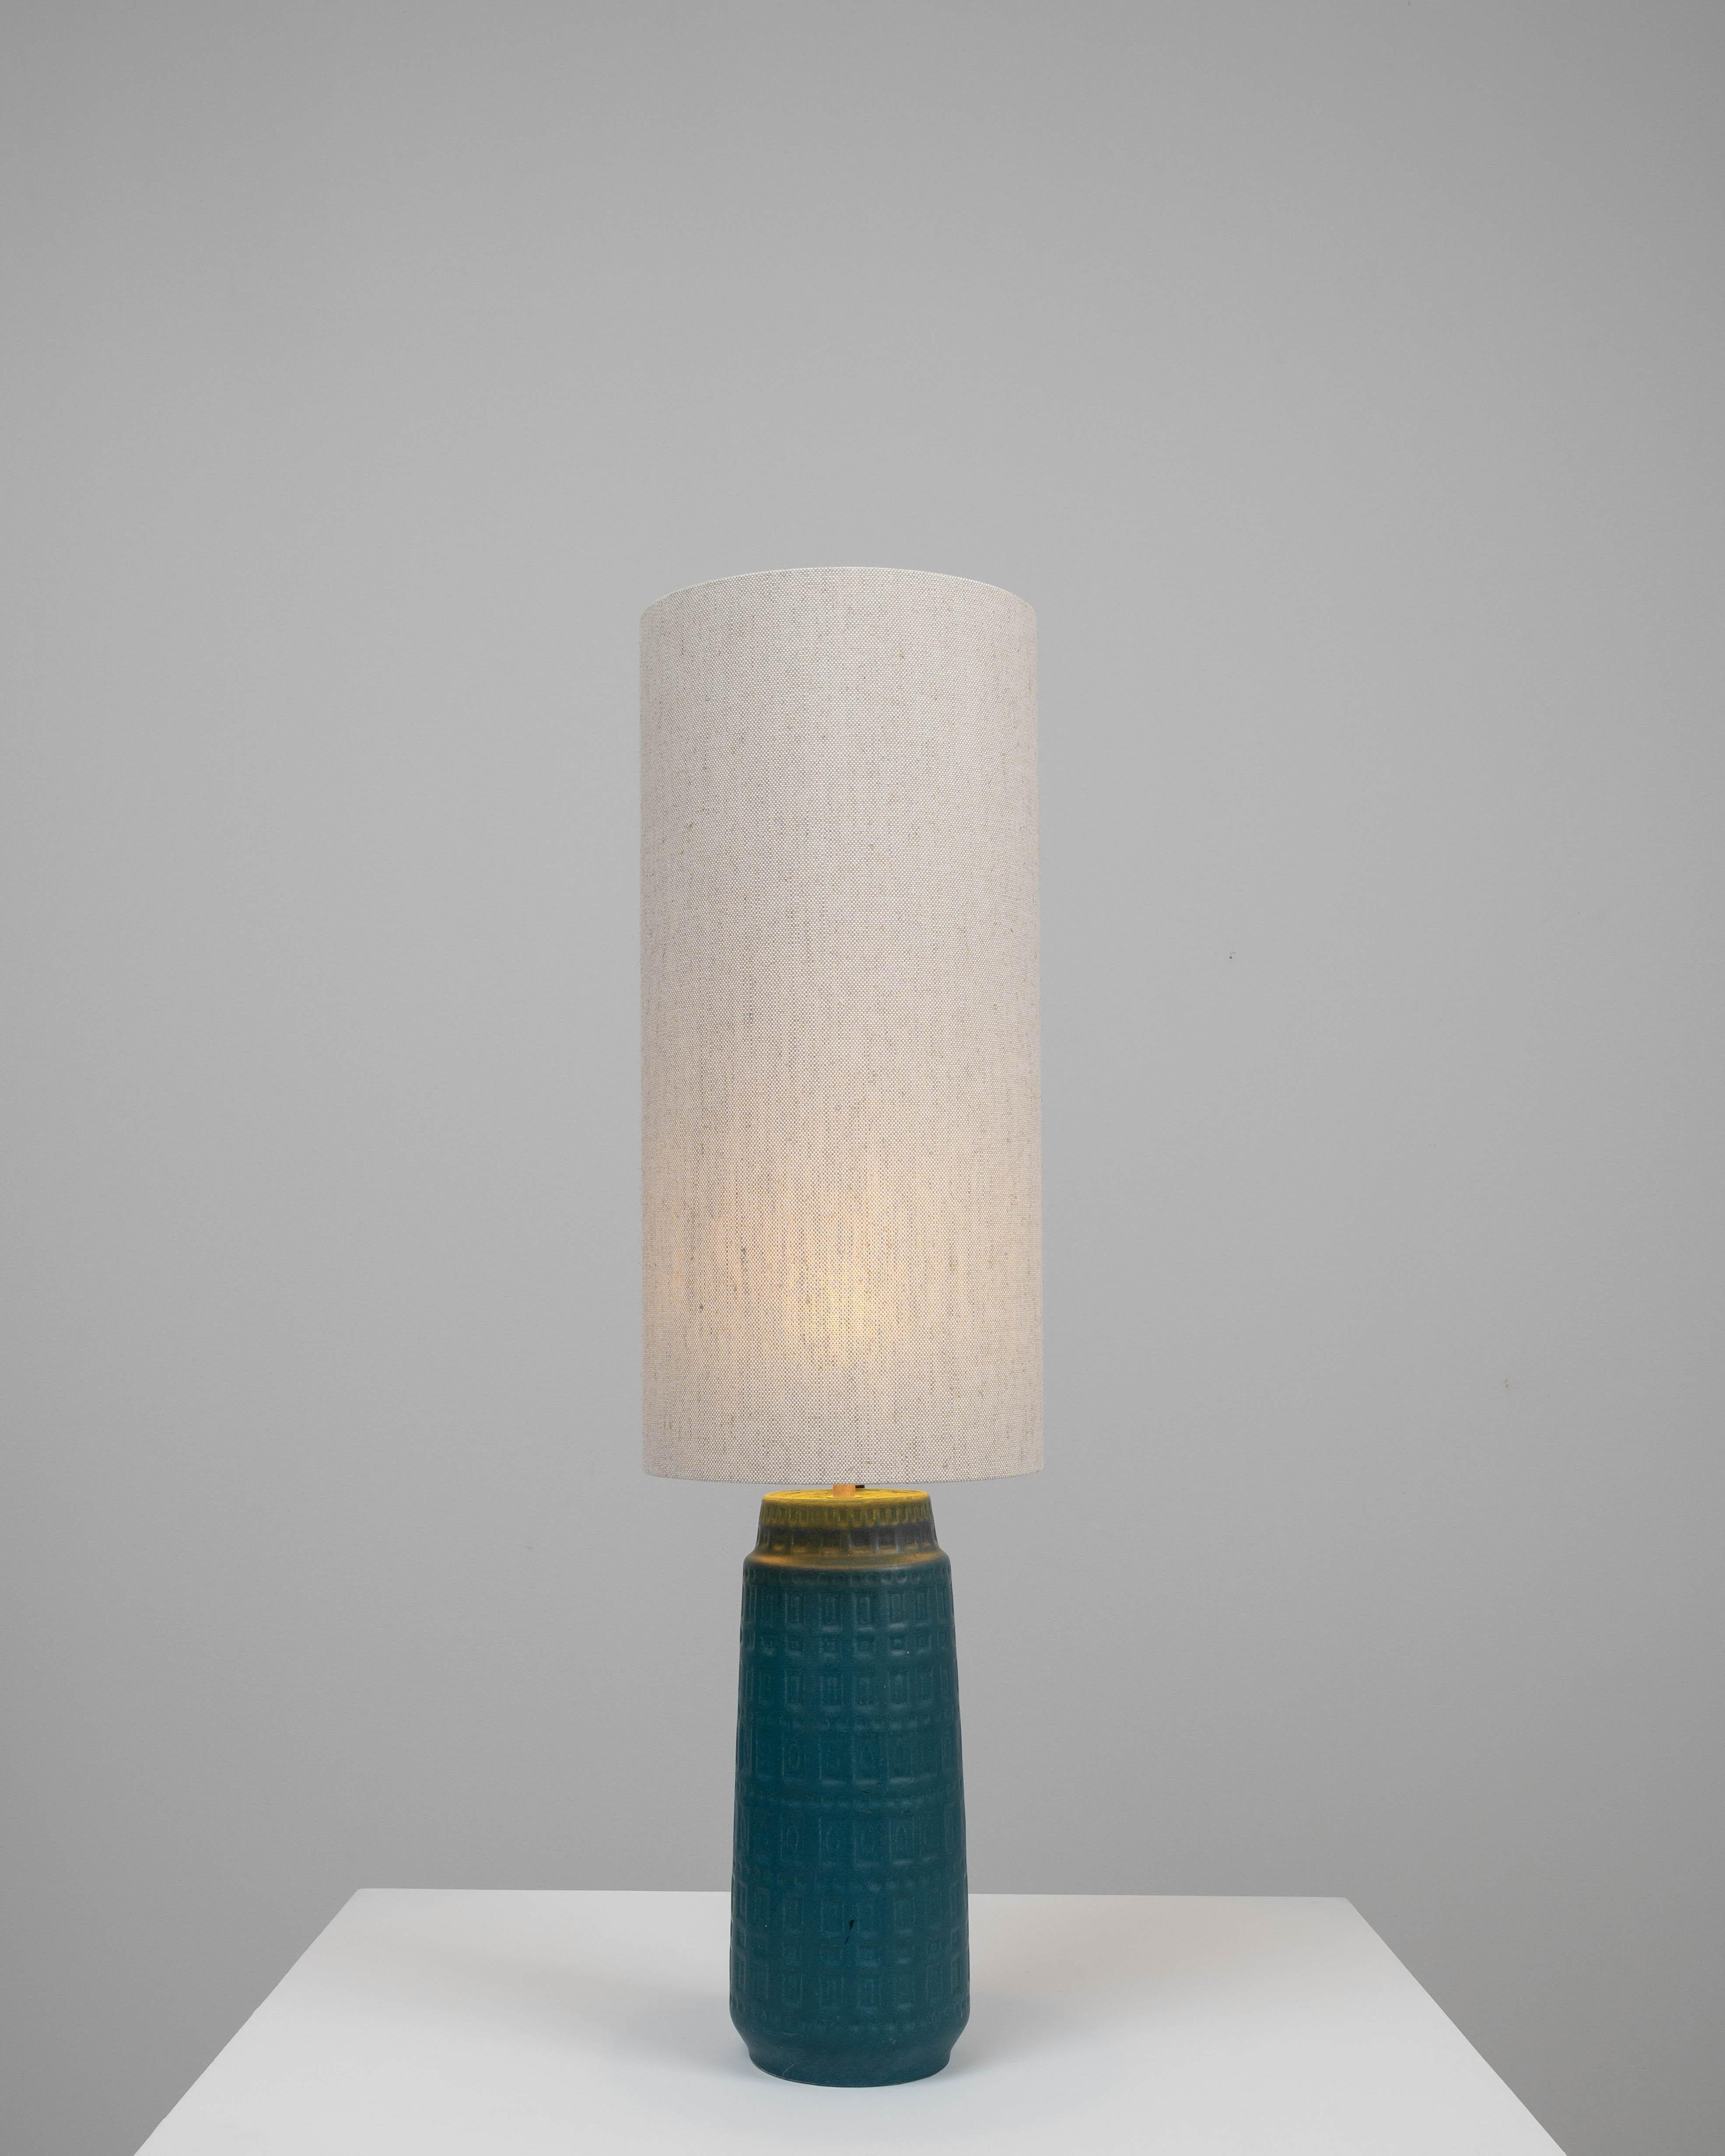 This 20th-century German ceramic table lamp showcases the timeless beauty of craftsmanship with its deep blue hue and embossed geometric patterns. The base of the lamp is a ceramic work of art, featuring a rich, textured design that captures the eye